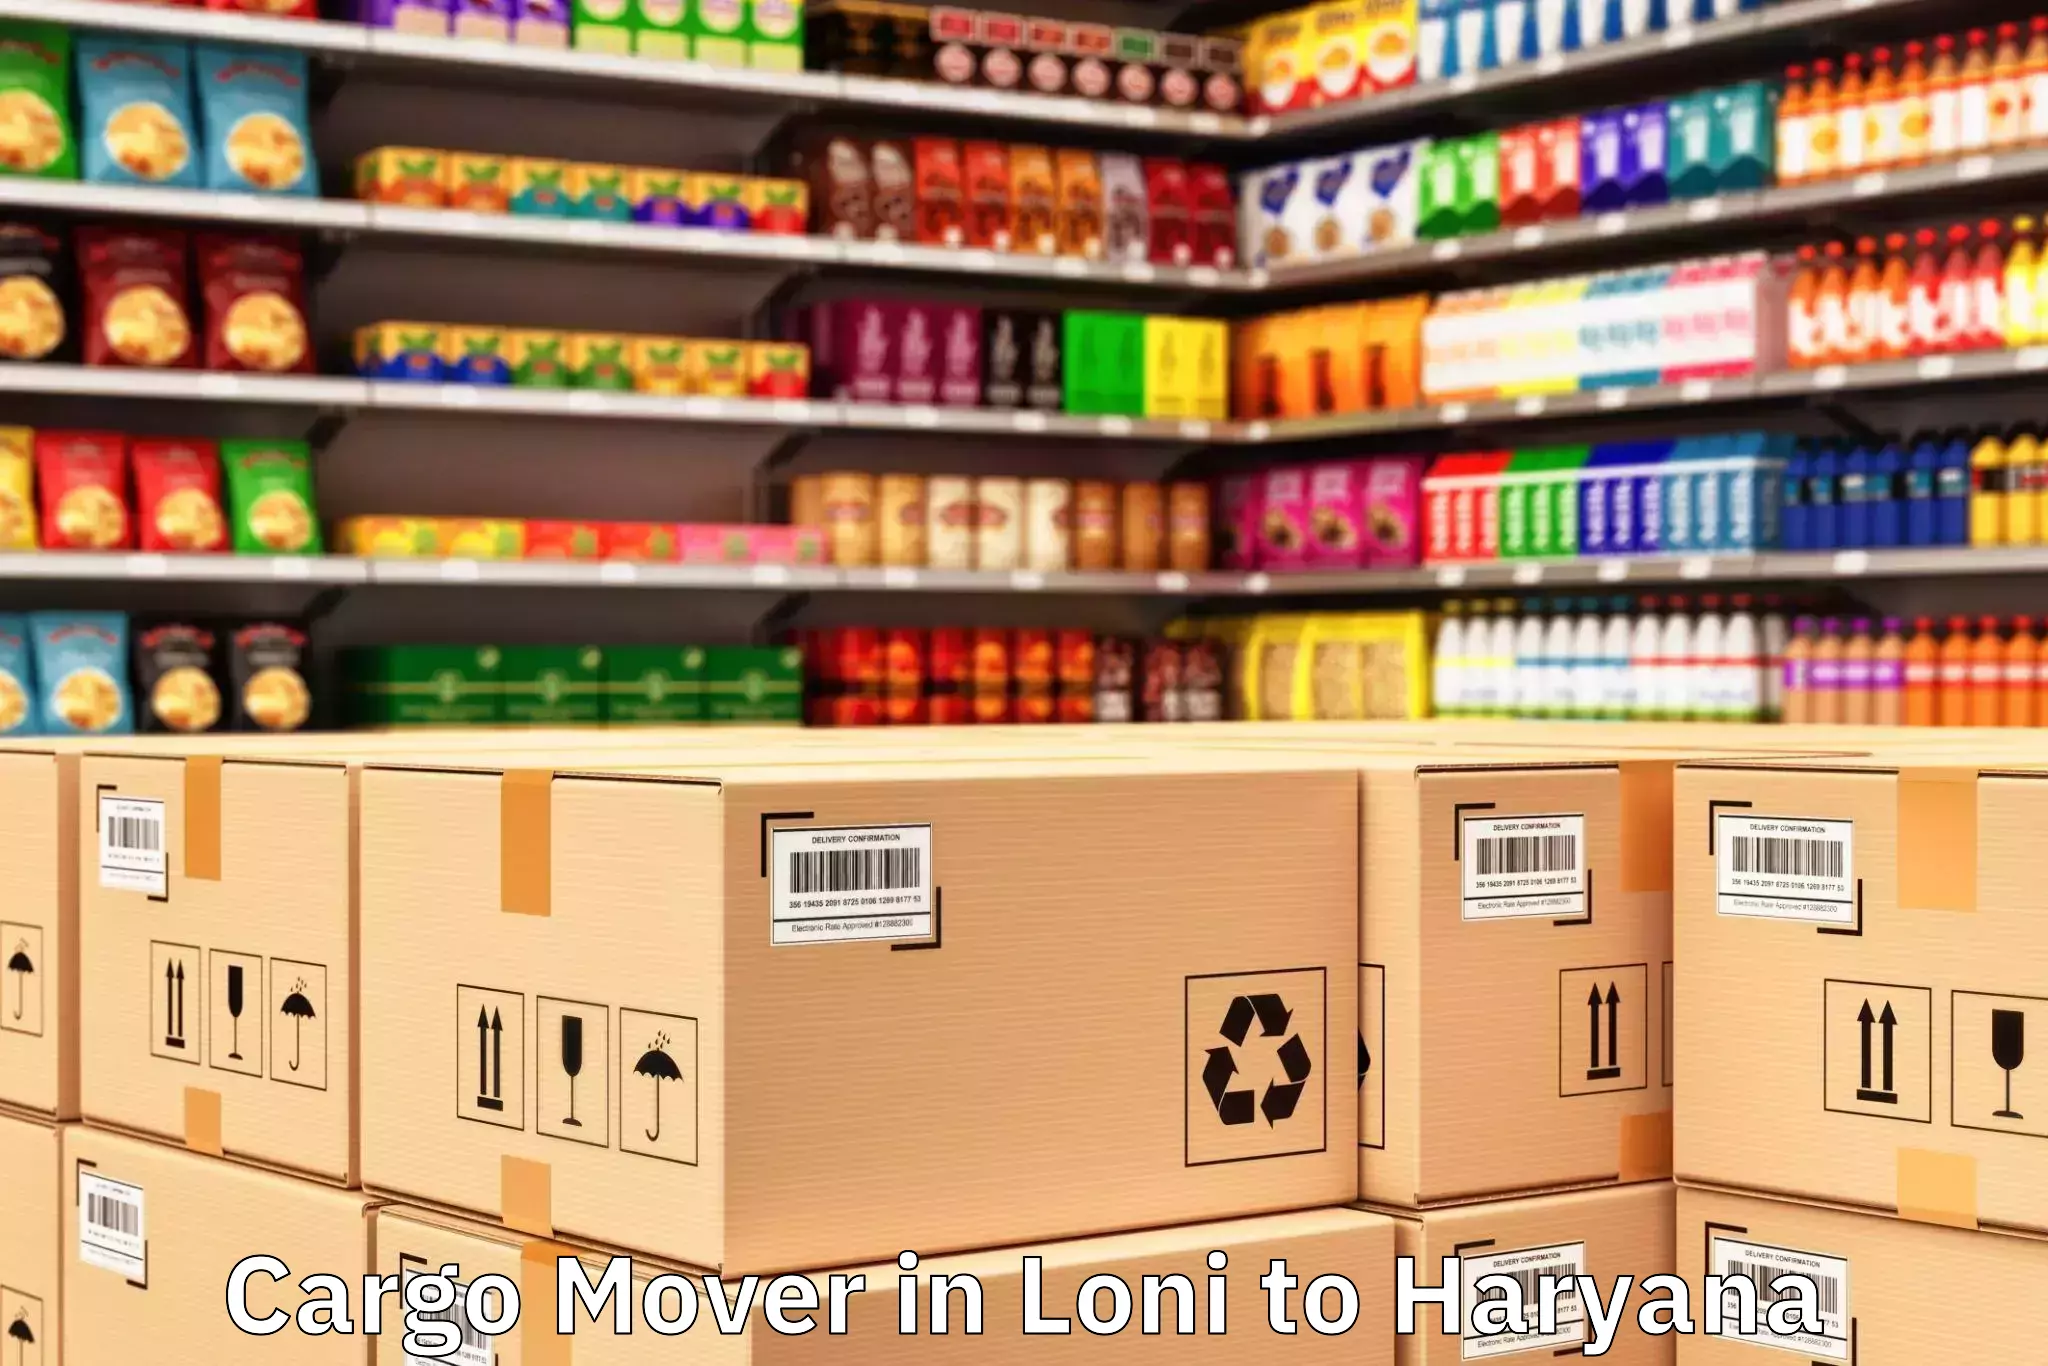 Top Loni to Haryana Cargo Mover Available